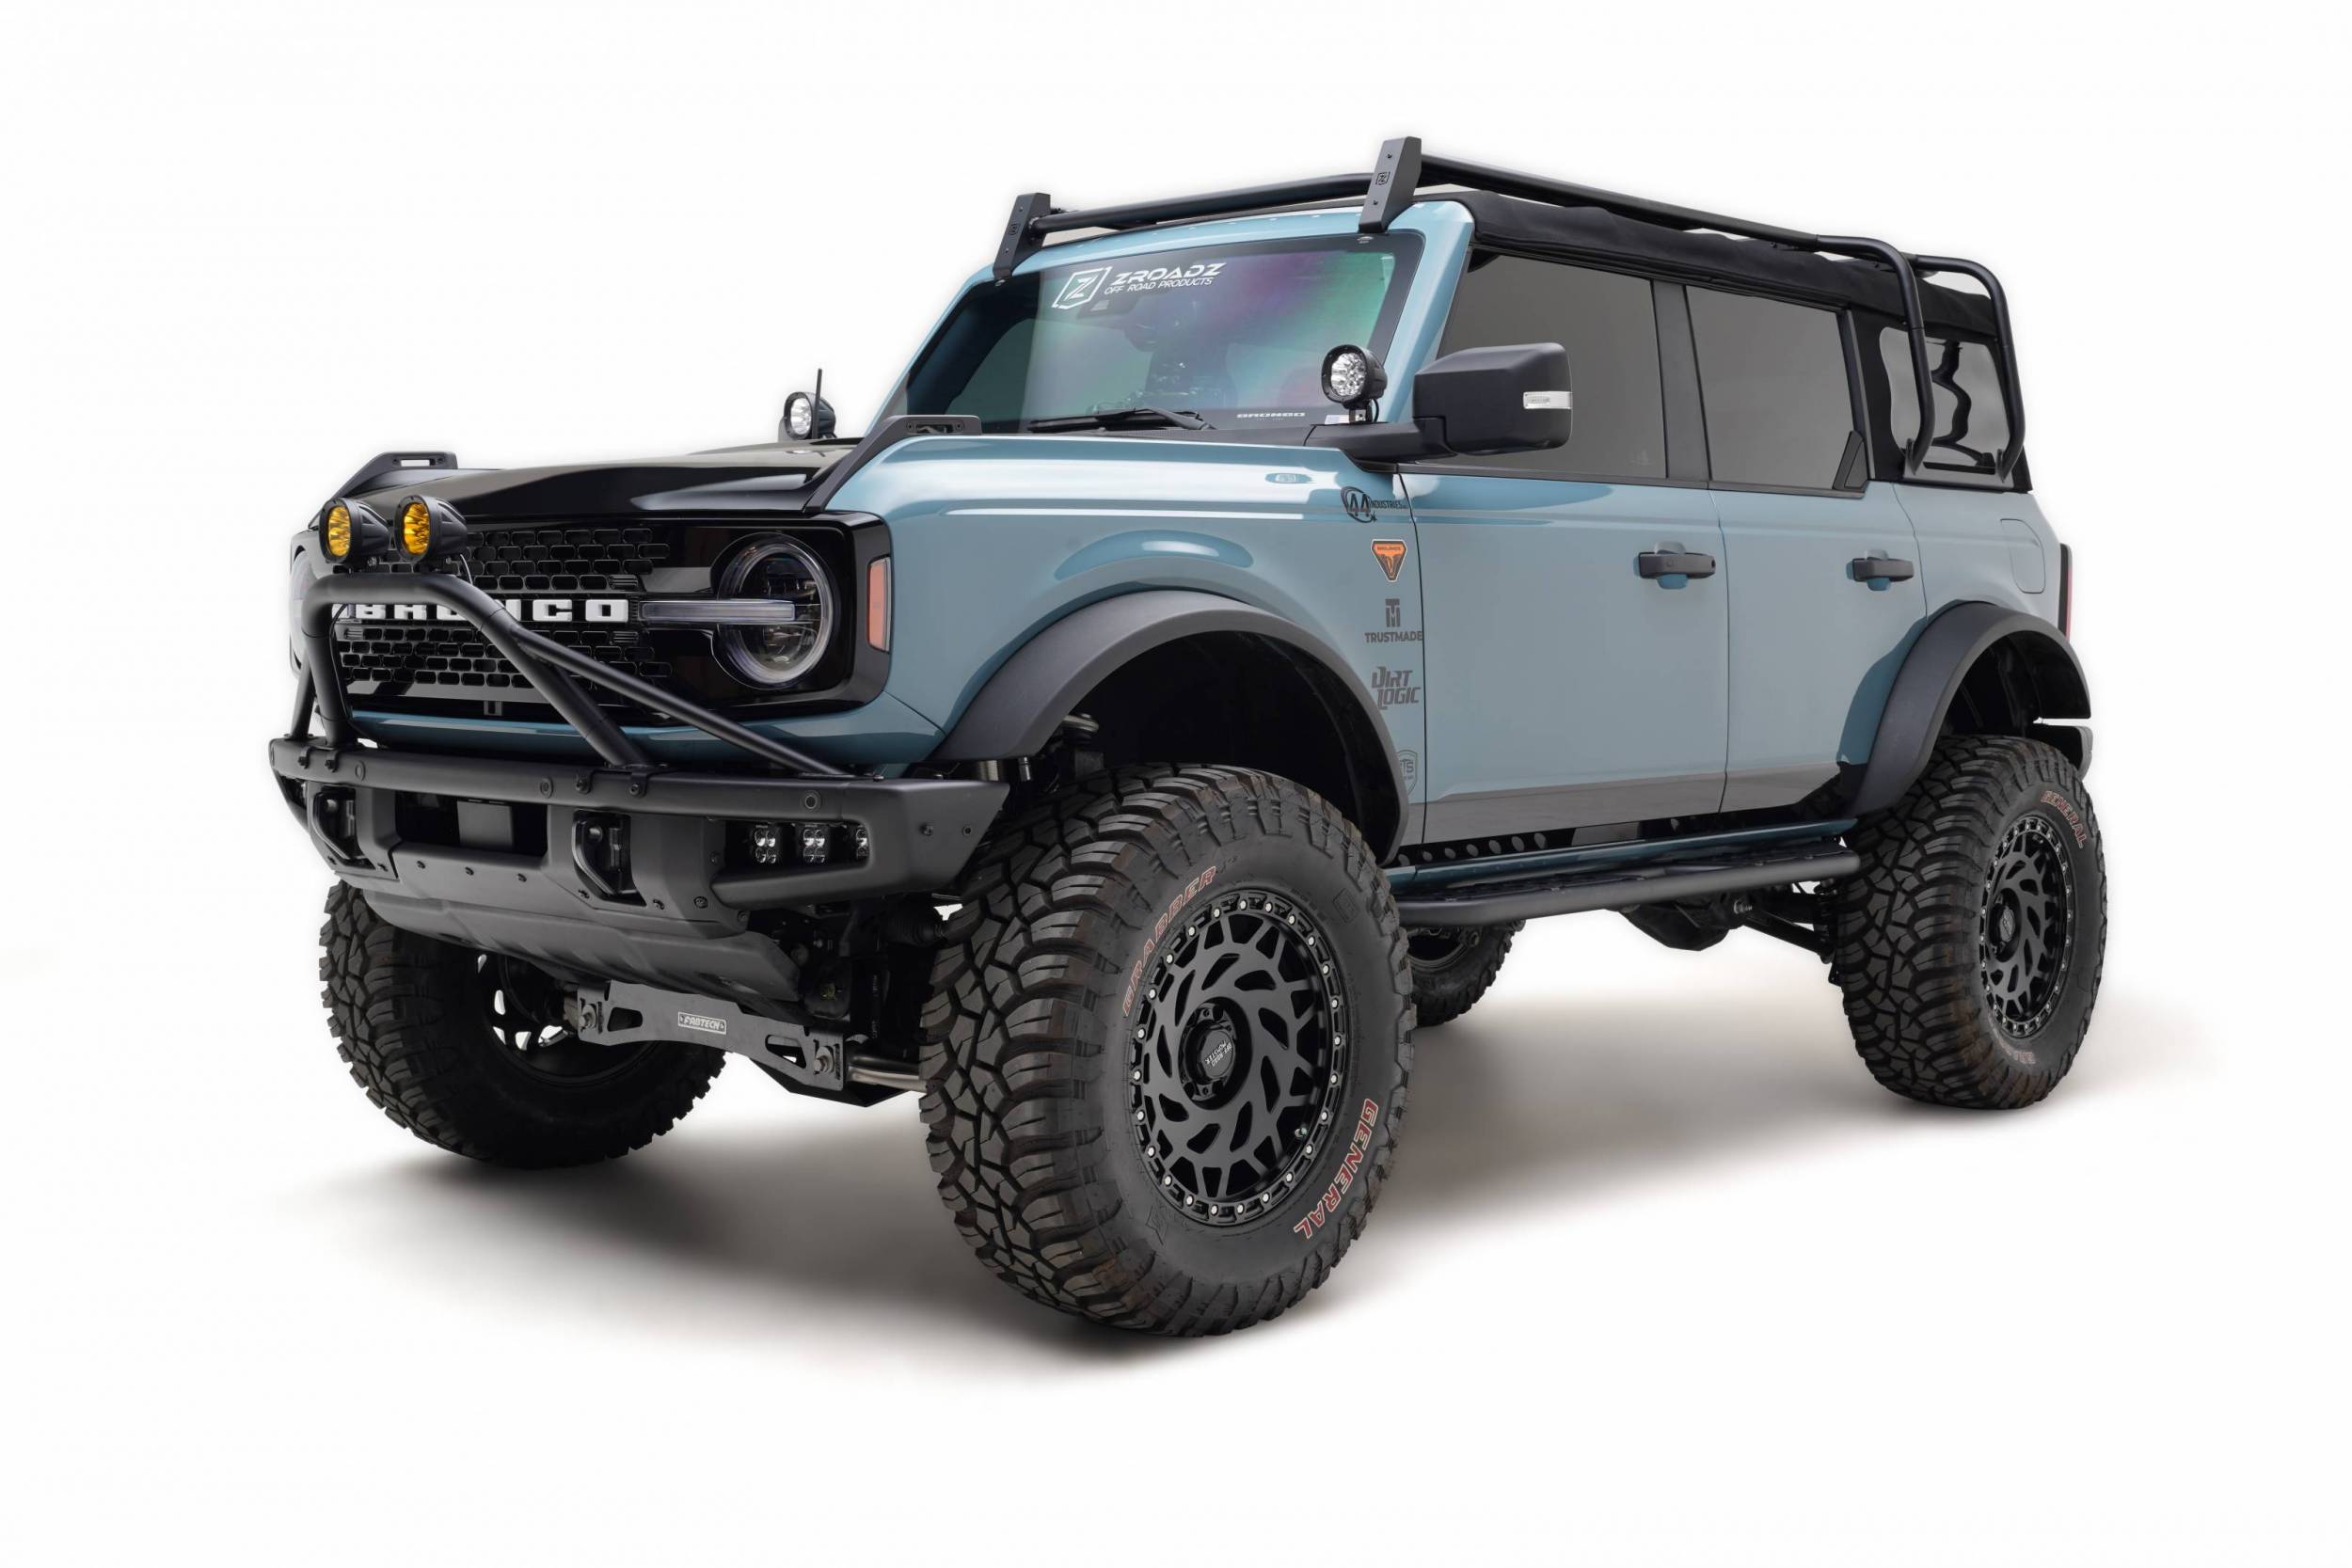 Ford Bronco Updated Soft Top Rack Images - ZROADZ OffRoad Ford Bronco Soft Top Rack with NO MOLLE Panels